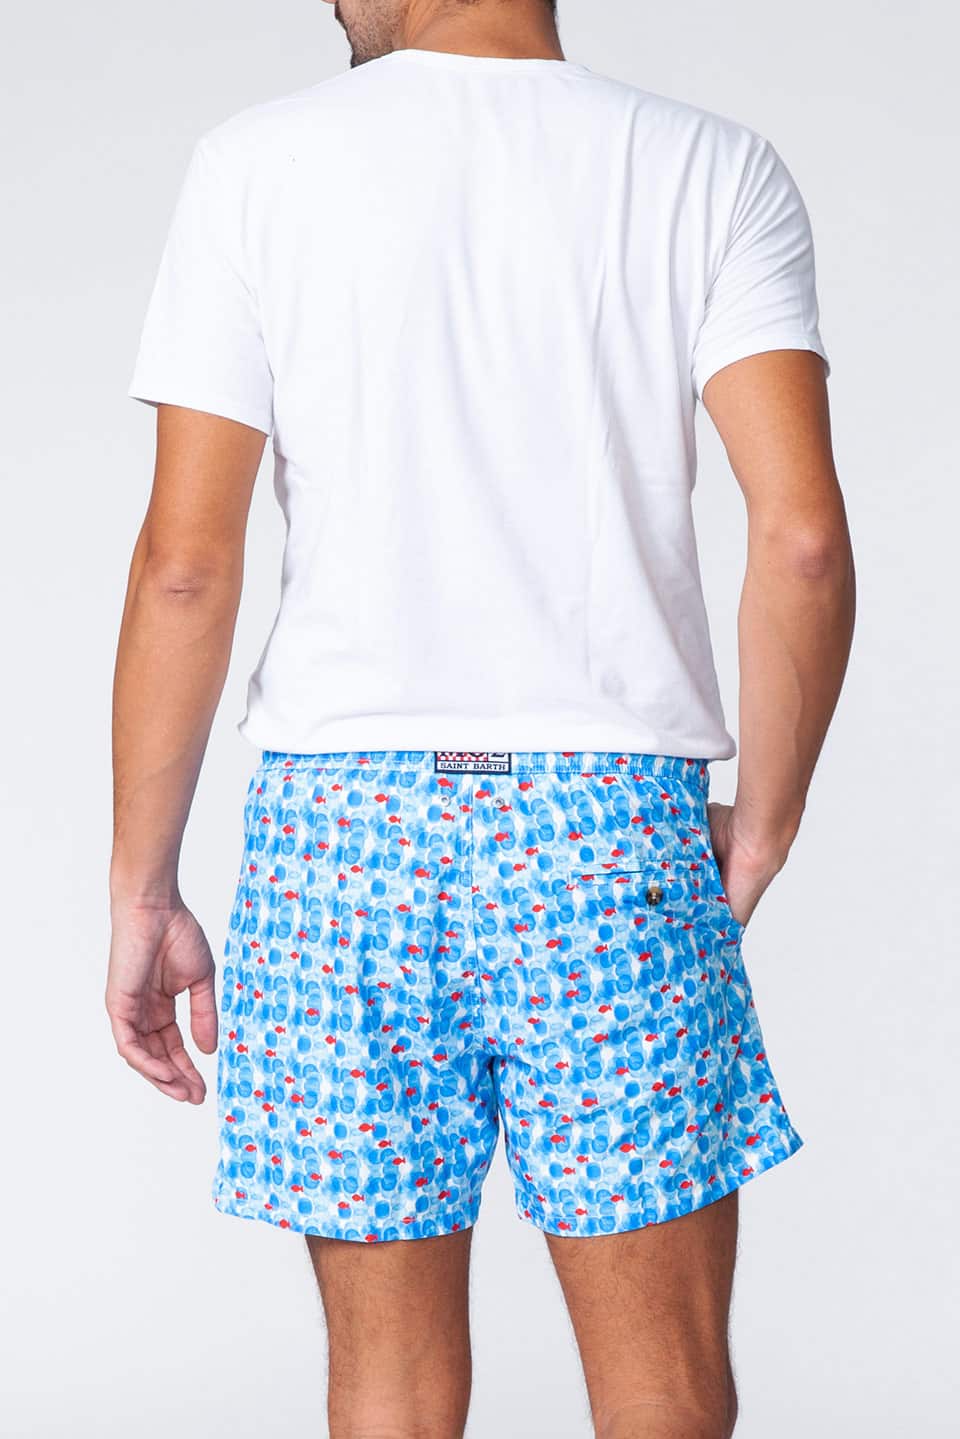 Designer Light blue Men swimwear, shop online with free delivery in UAE. Product gallery 2